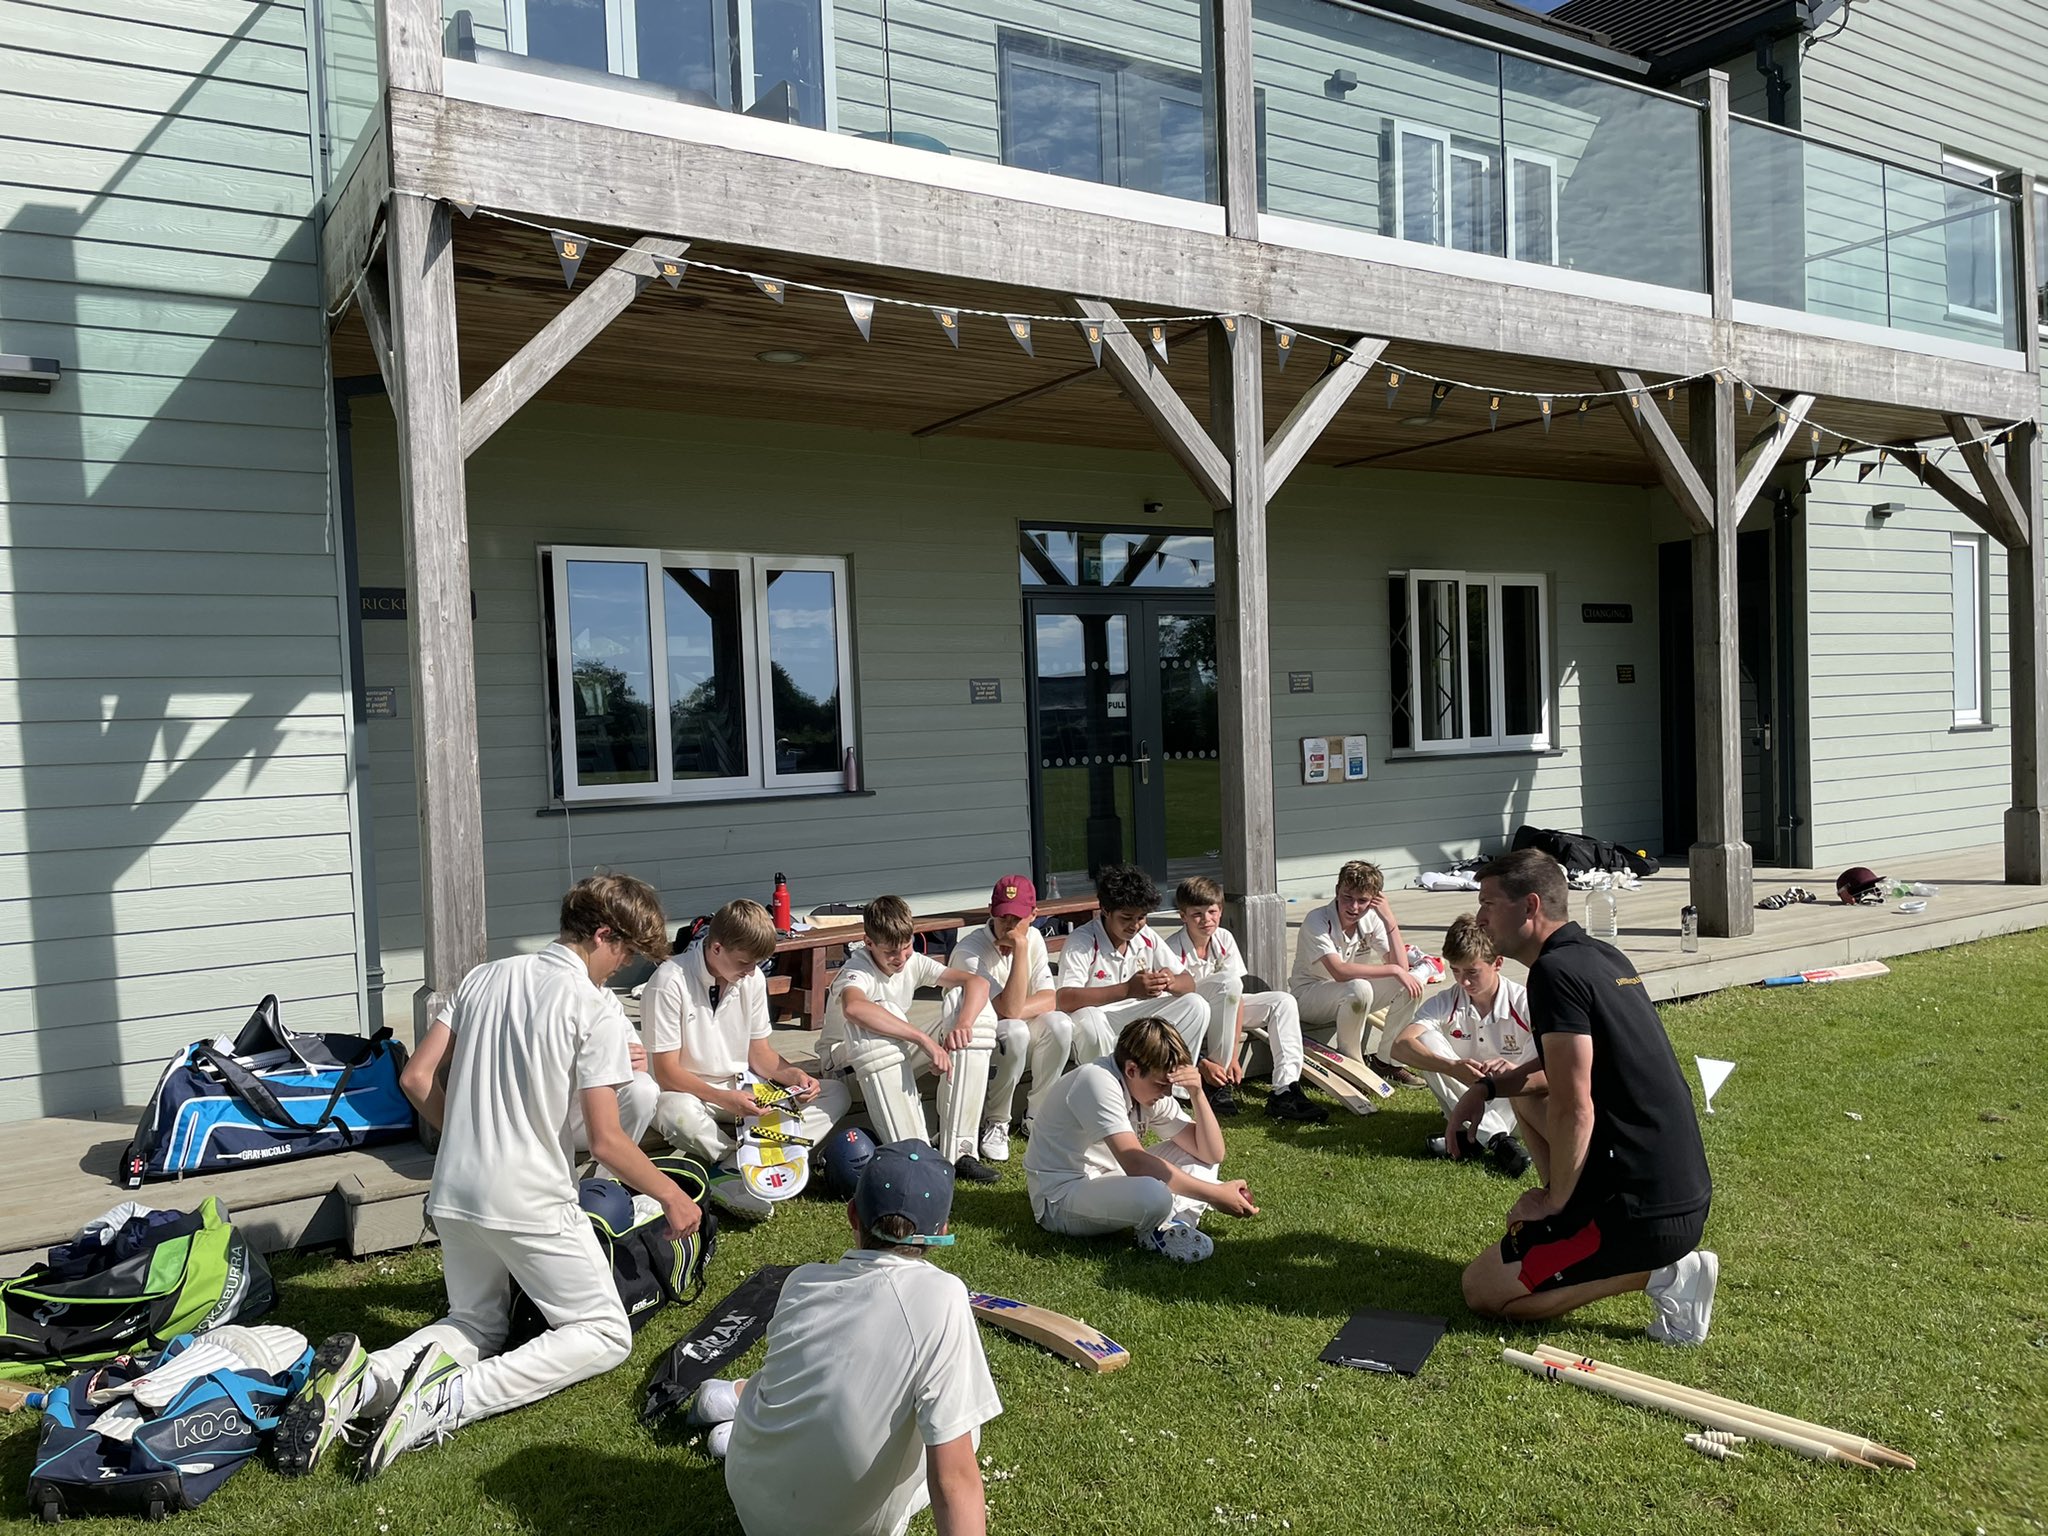 'One of the best Cricketing Performances in the last 10 years' by our U13 boys!